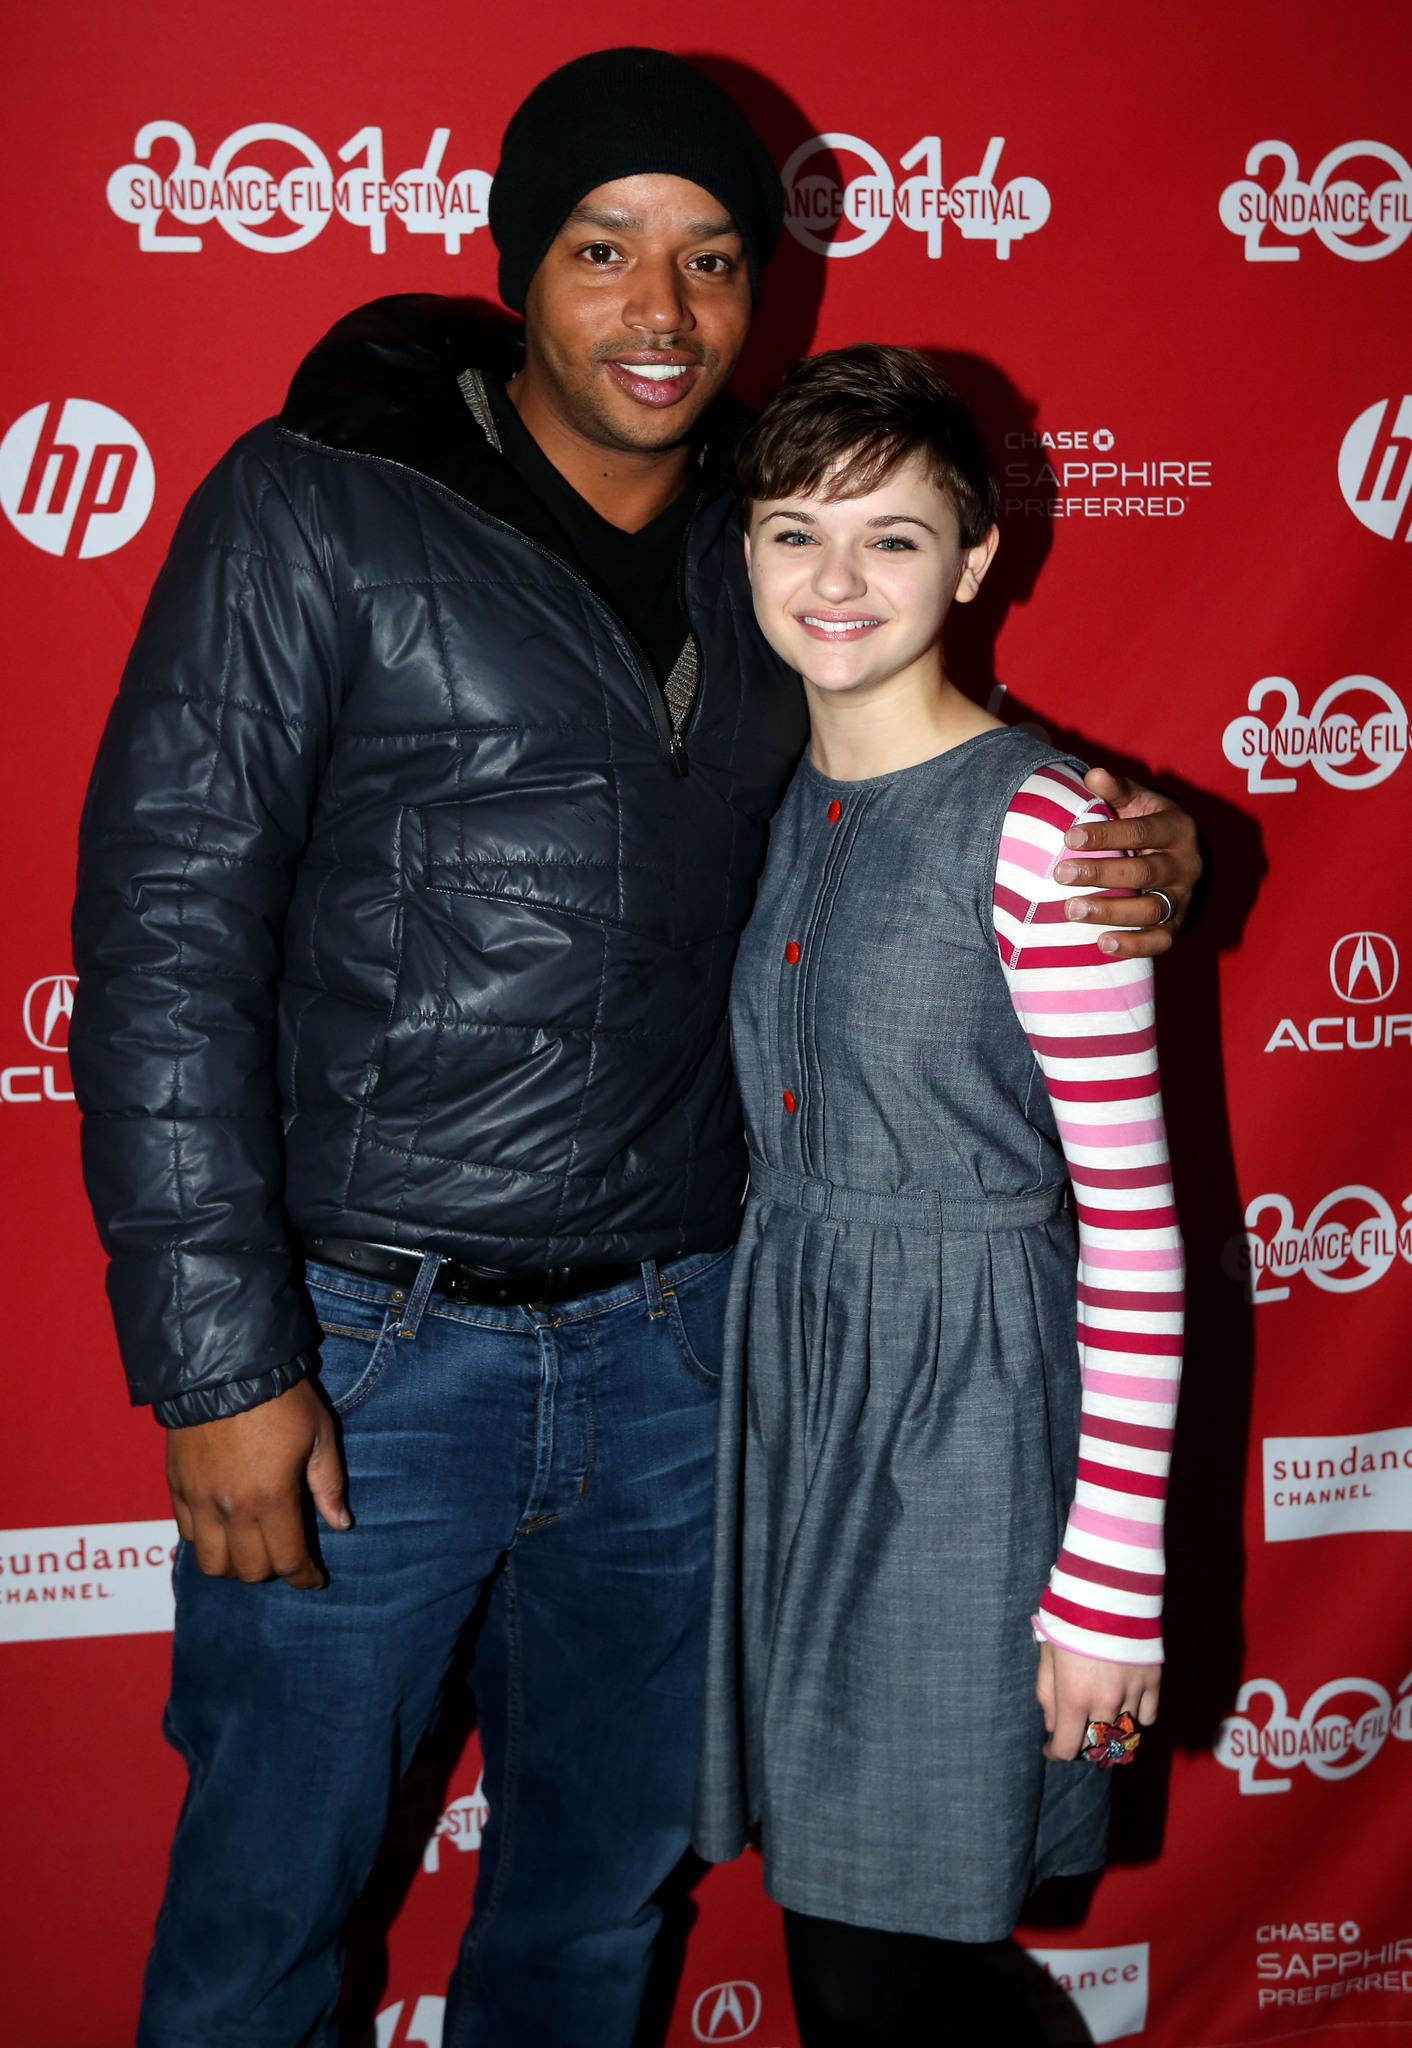 Donald Faison and Joey King at event of Wish I Was Here (2014)